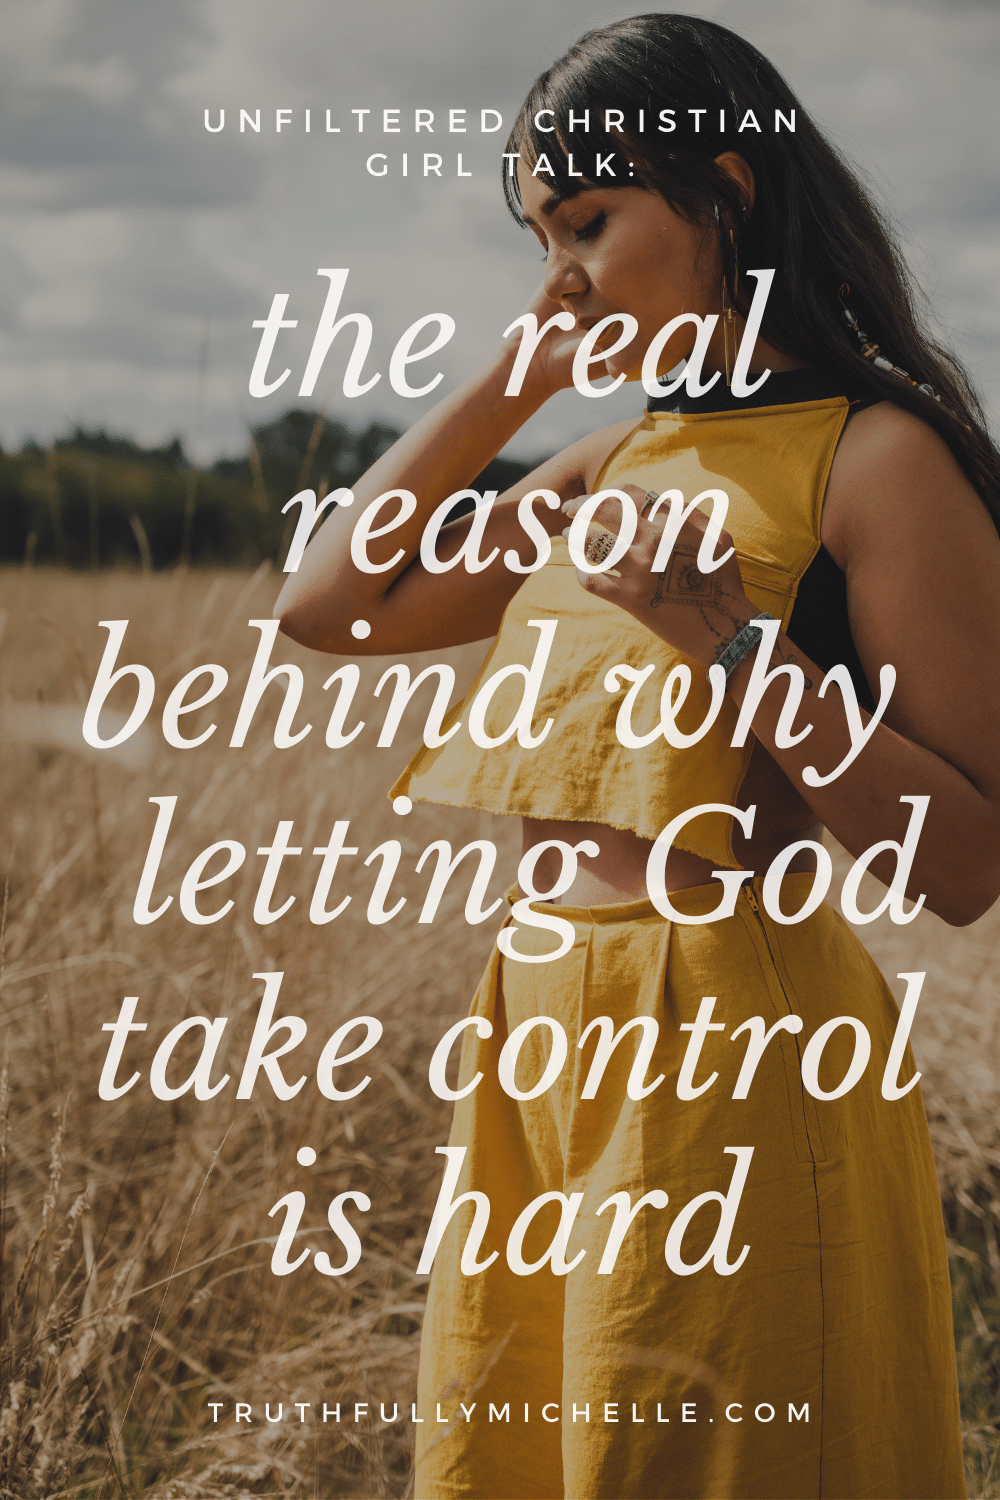 Letting go and letting God take control, How to let God take control of your life, When you let God take control, Allowing God to lead, Giving up control to God, Let God control your life, Allowing God to take control, How to give God control, God controls my life and destiny, How to have faith in God completely, How to let God take control, How to fully trust God, How to trust God in hard times spiritual inspiration and encouragement
